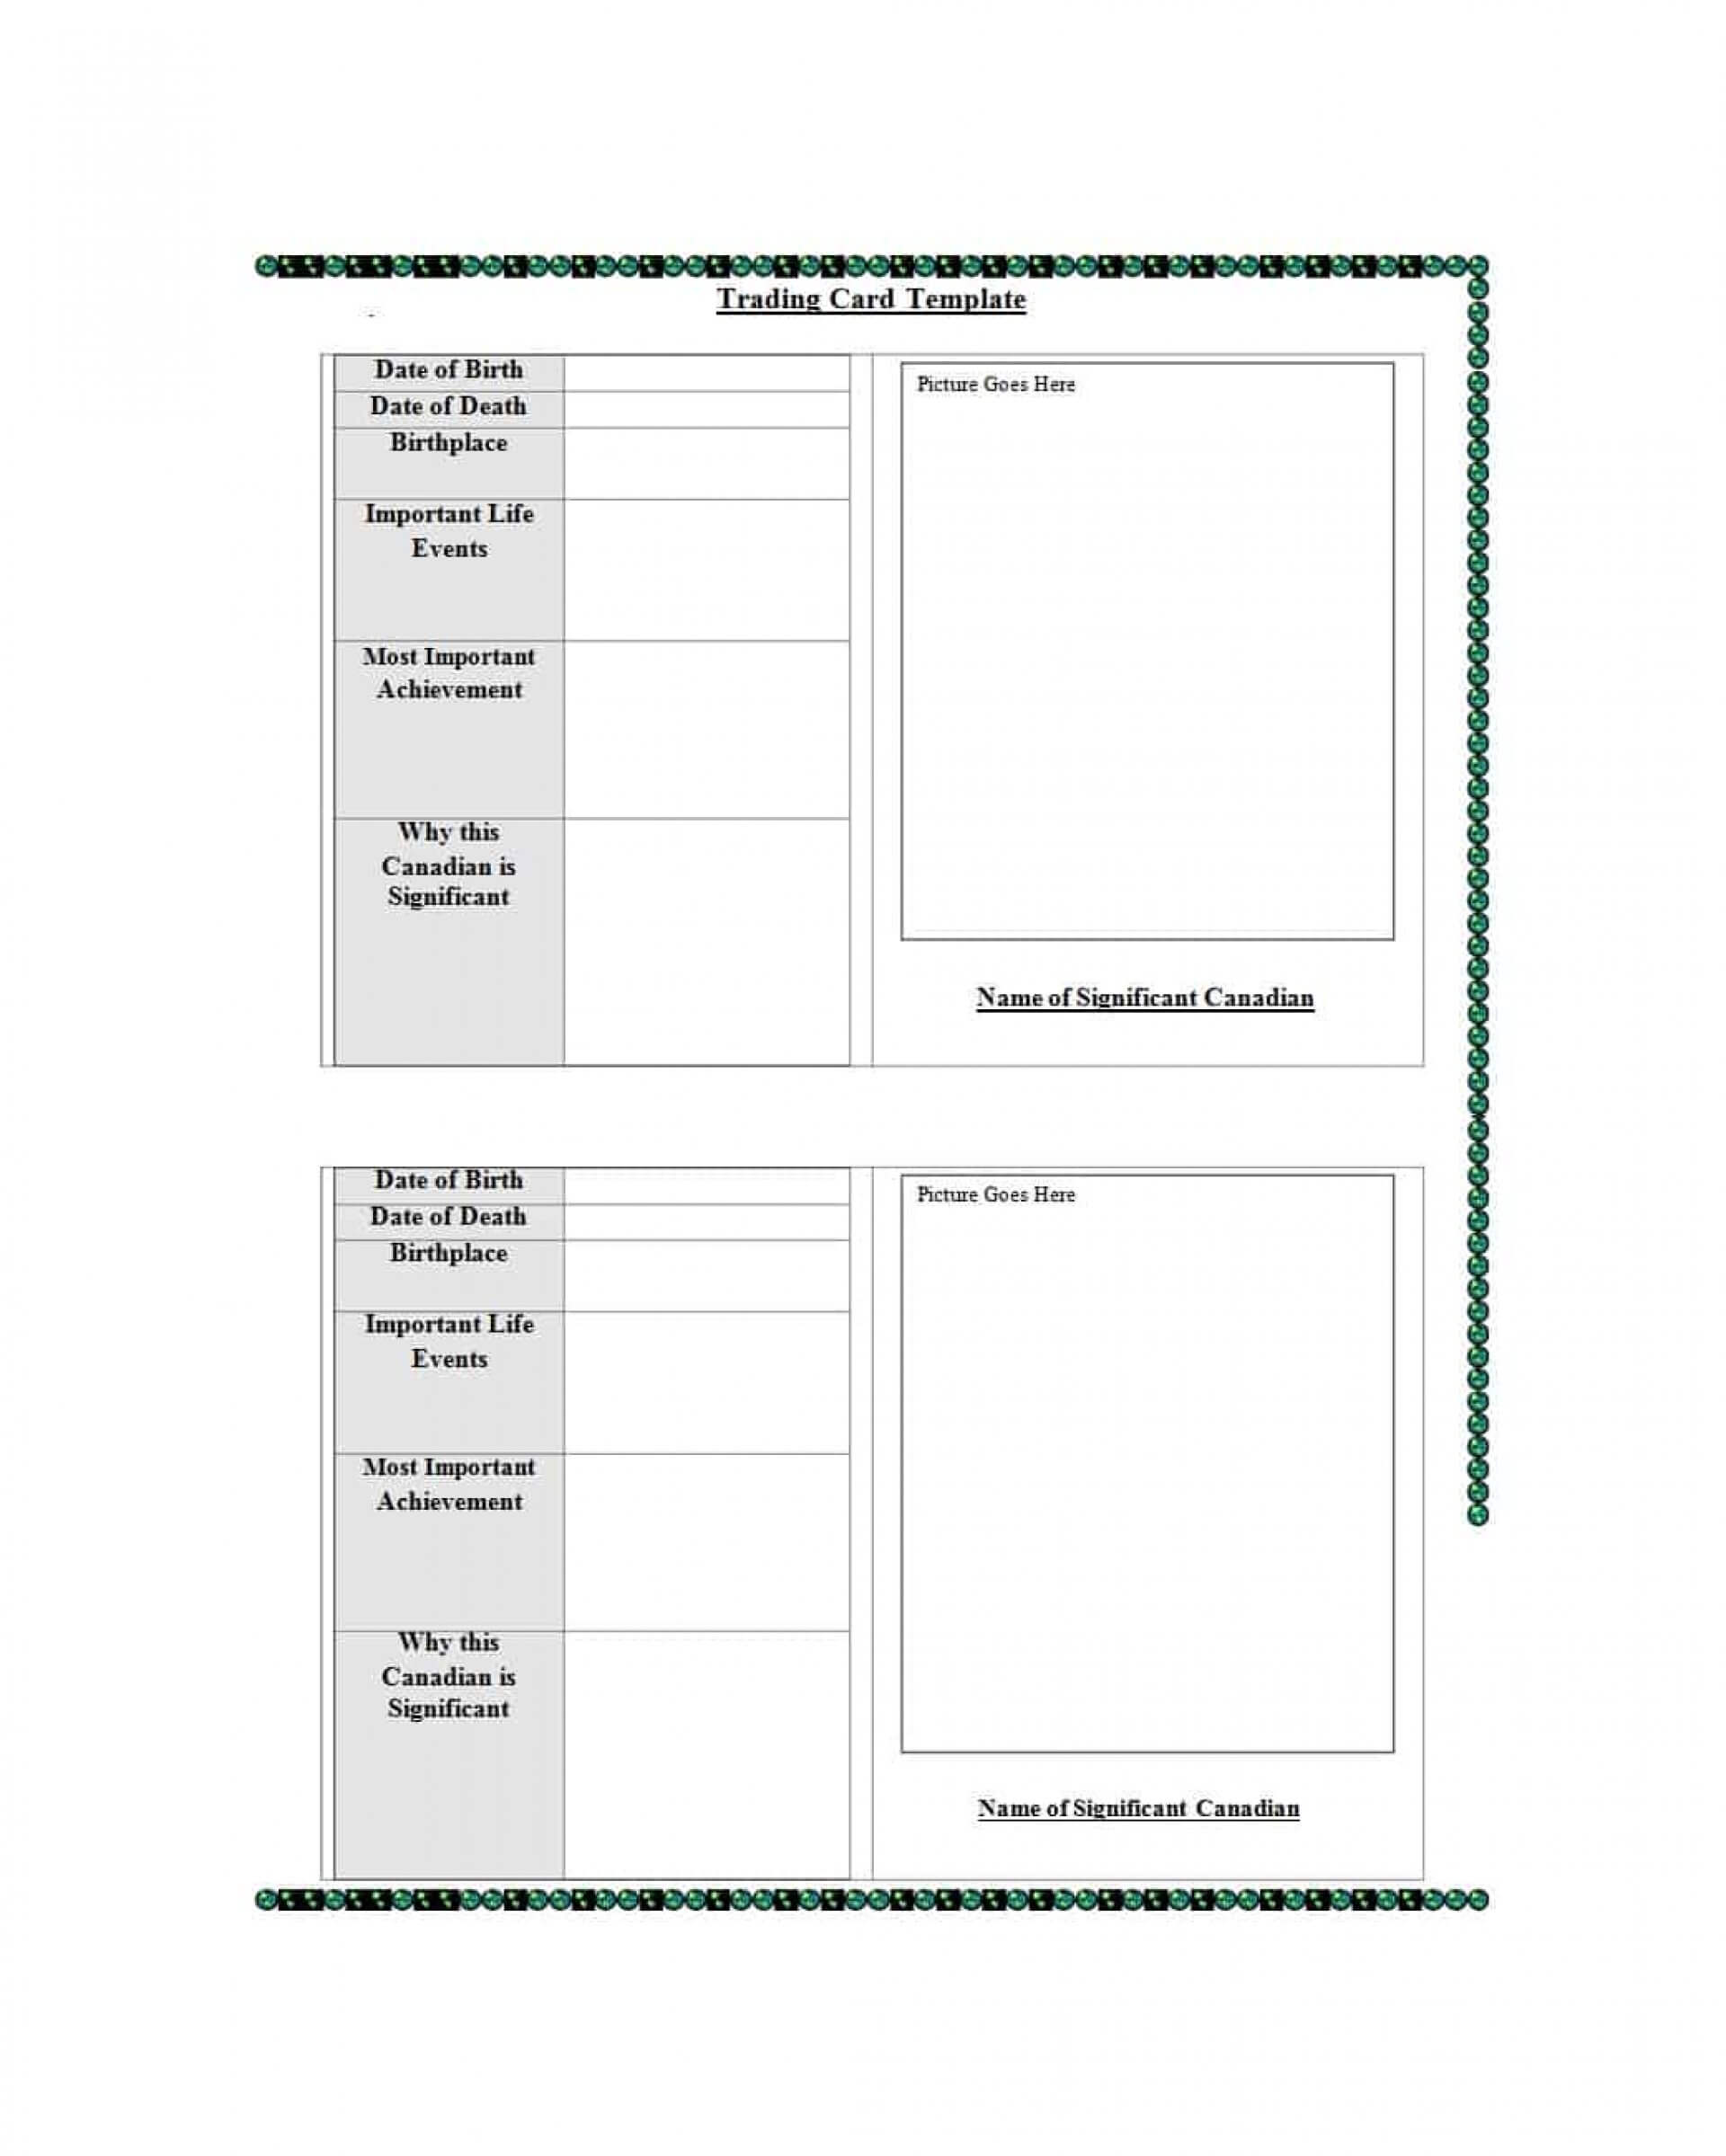 024 Baseball Trading Card Template Free Download Ideas With Regard To Trading Cards Templates Free Download